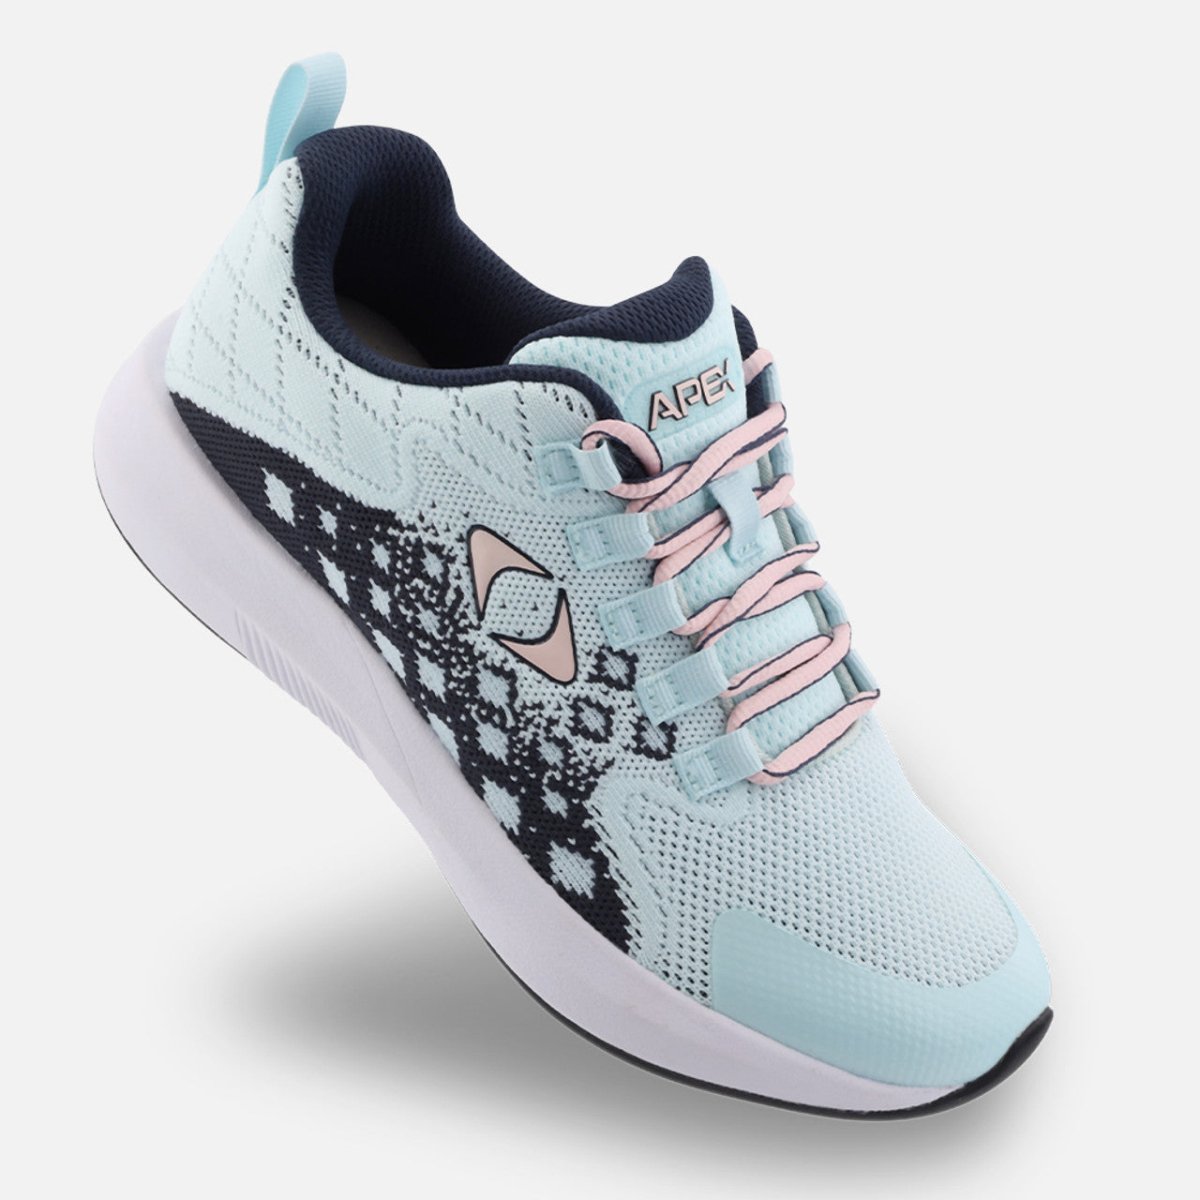 APEX P9200W PERFORMANCE V WOMEN'S ATHLETIC SNEAKER IN BLACK SEAFOAM / PINK - TLW Shoes